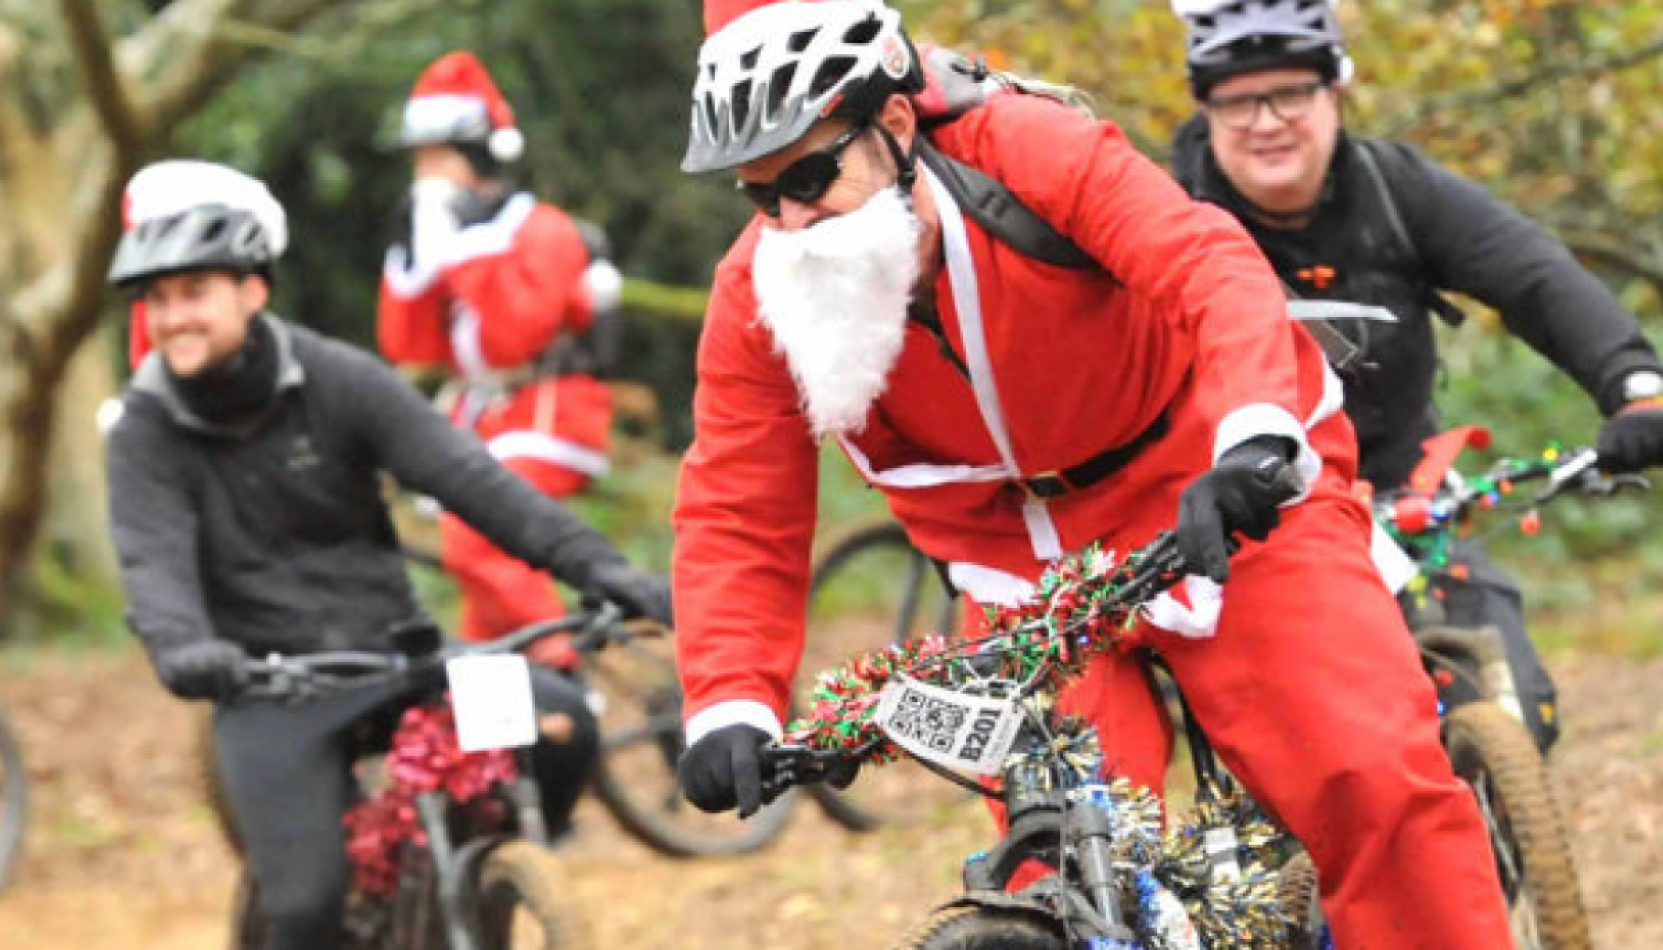 the sports locker, christmas, santa mtb, m4b, bike ride, christmas events, sports events, sports fixtures, surrey, guide to surrey, guide to whats on, guide to sports in surrey, guildford, dorking, surrey hills, guide to surrey hills,